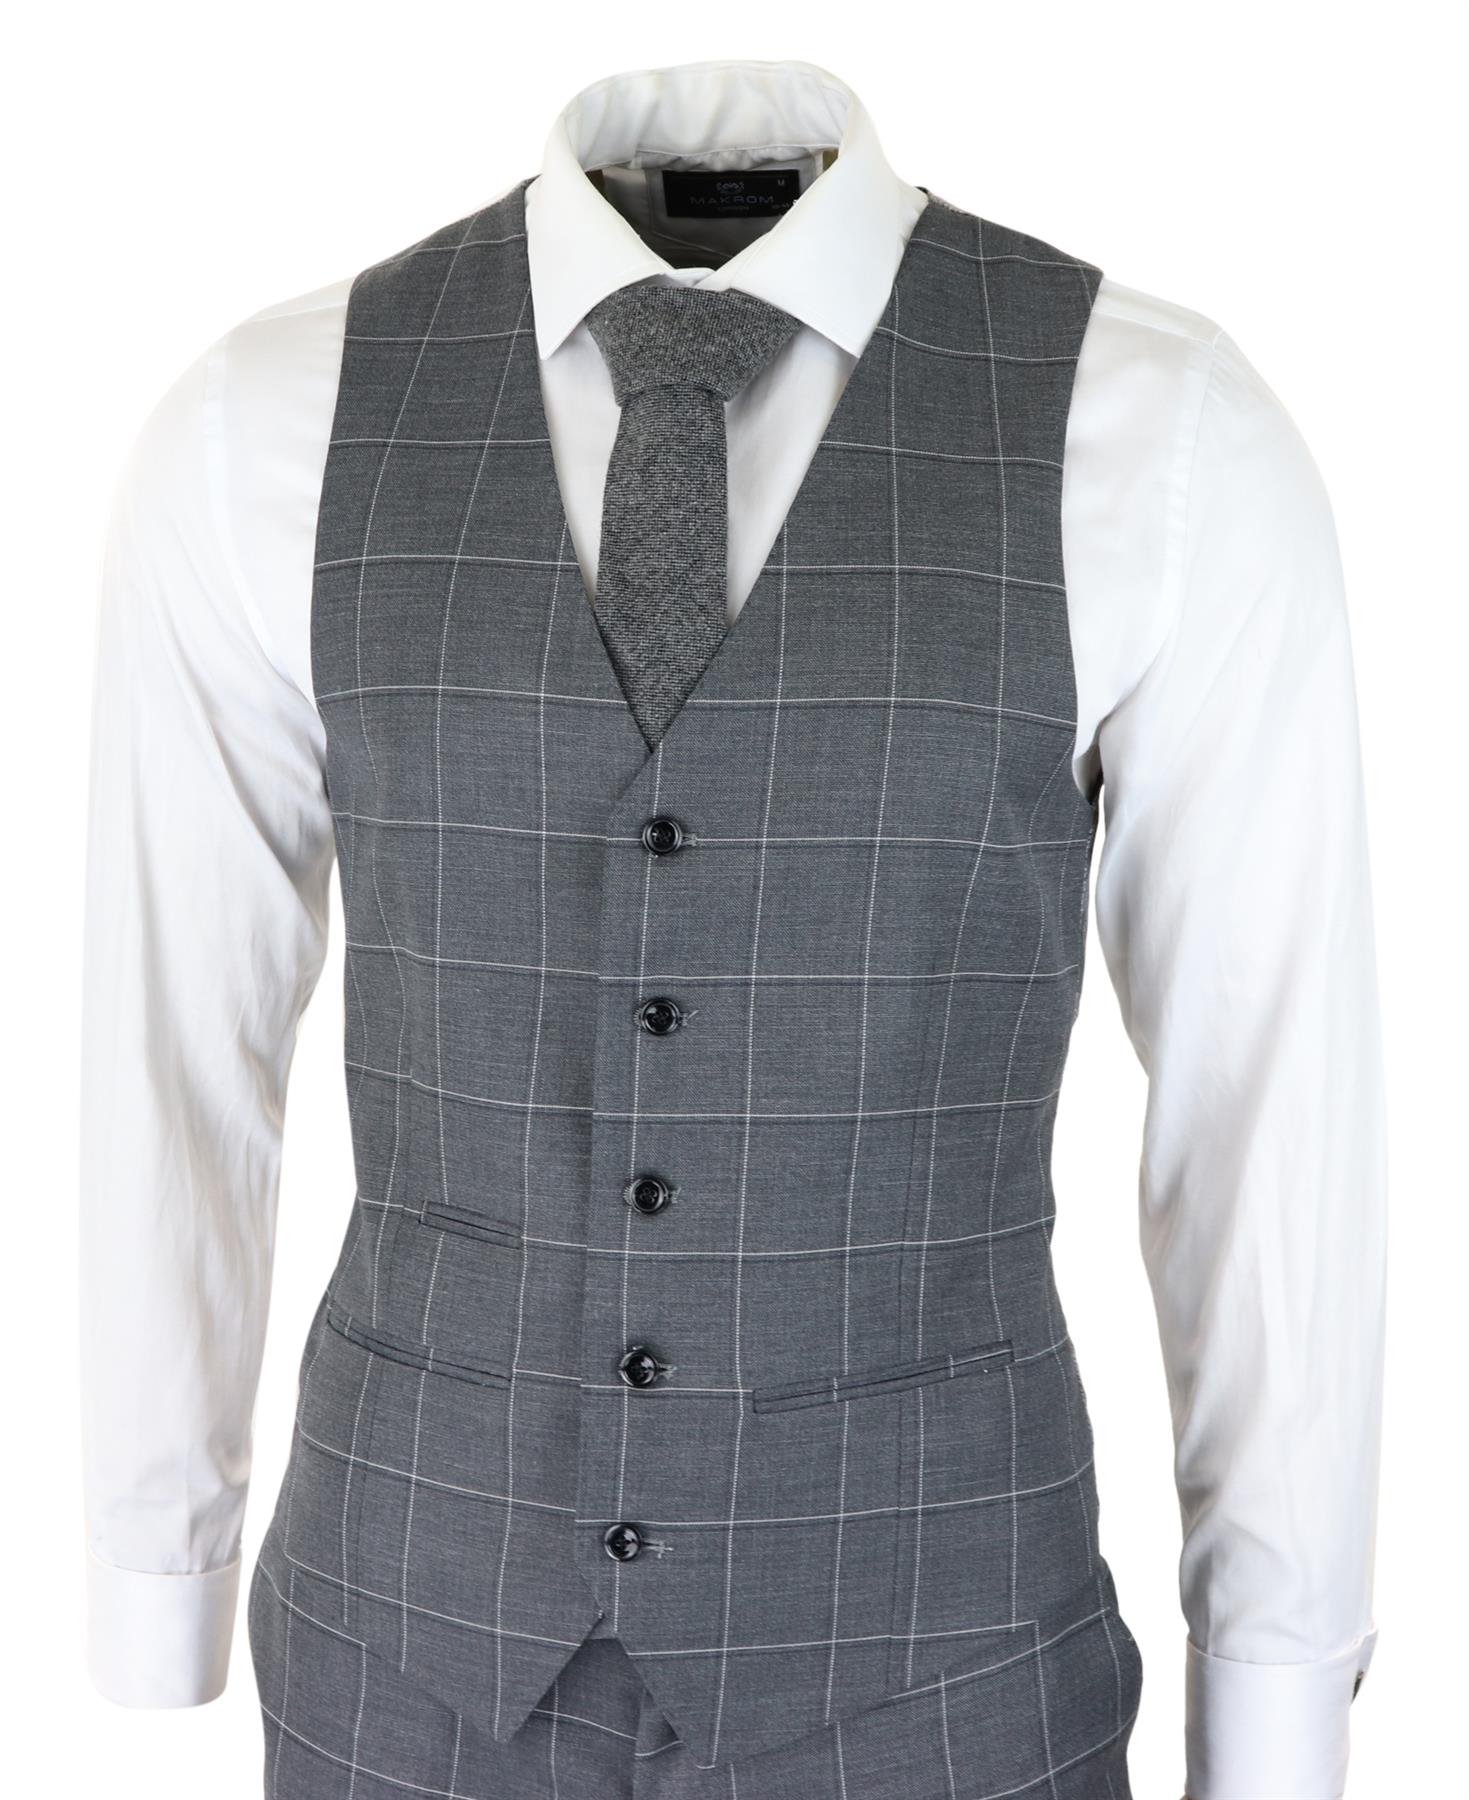 Mens Grey Suit 3 Piece Check Vintage Retro Smart Wedding Classic Tailored Fit - Upperclass Fashions 